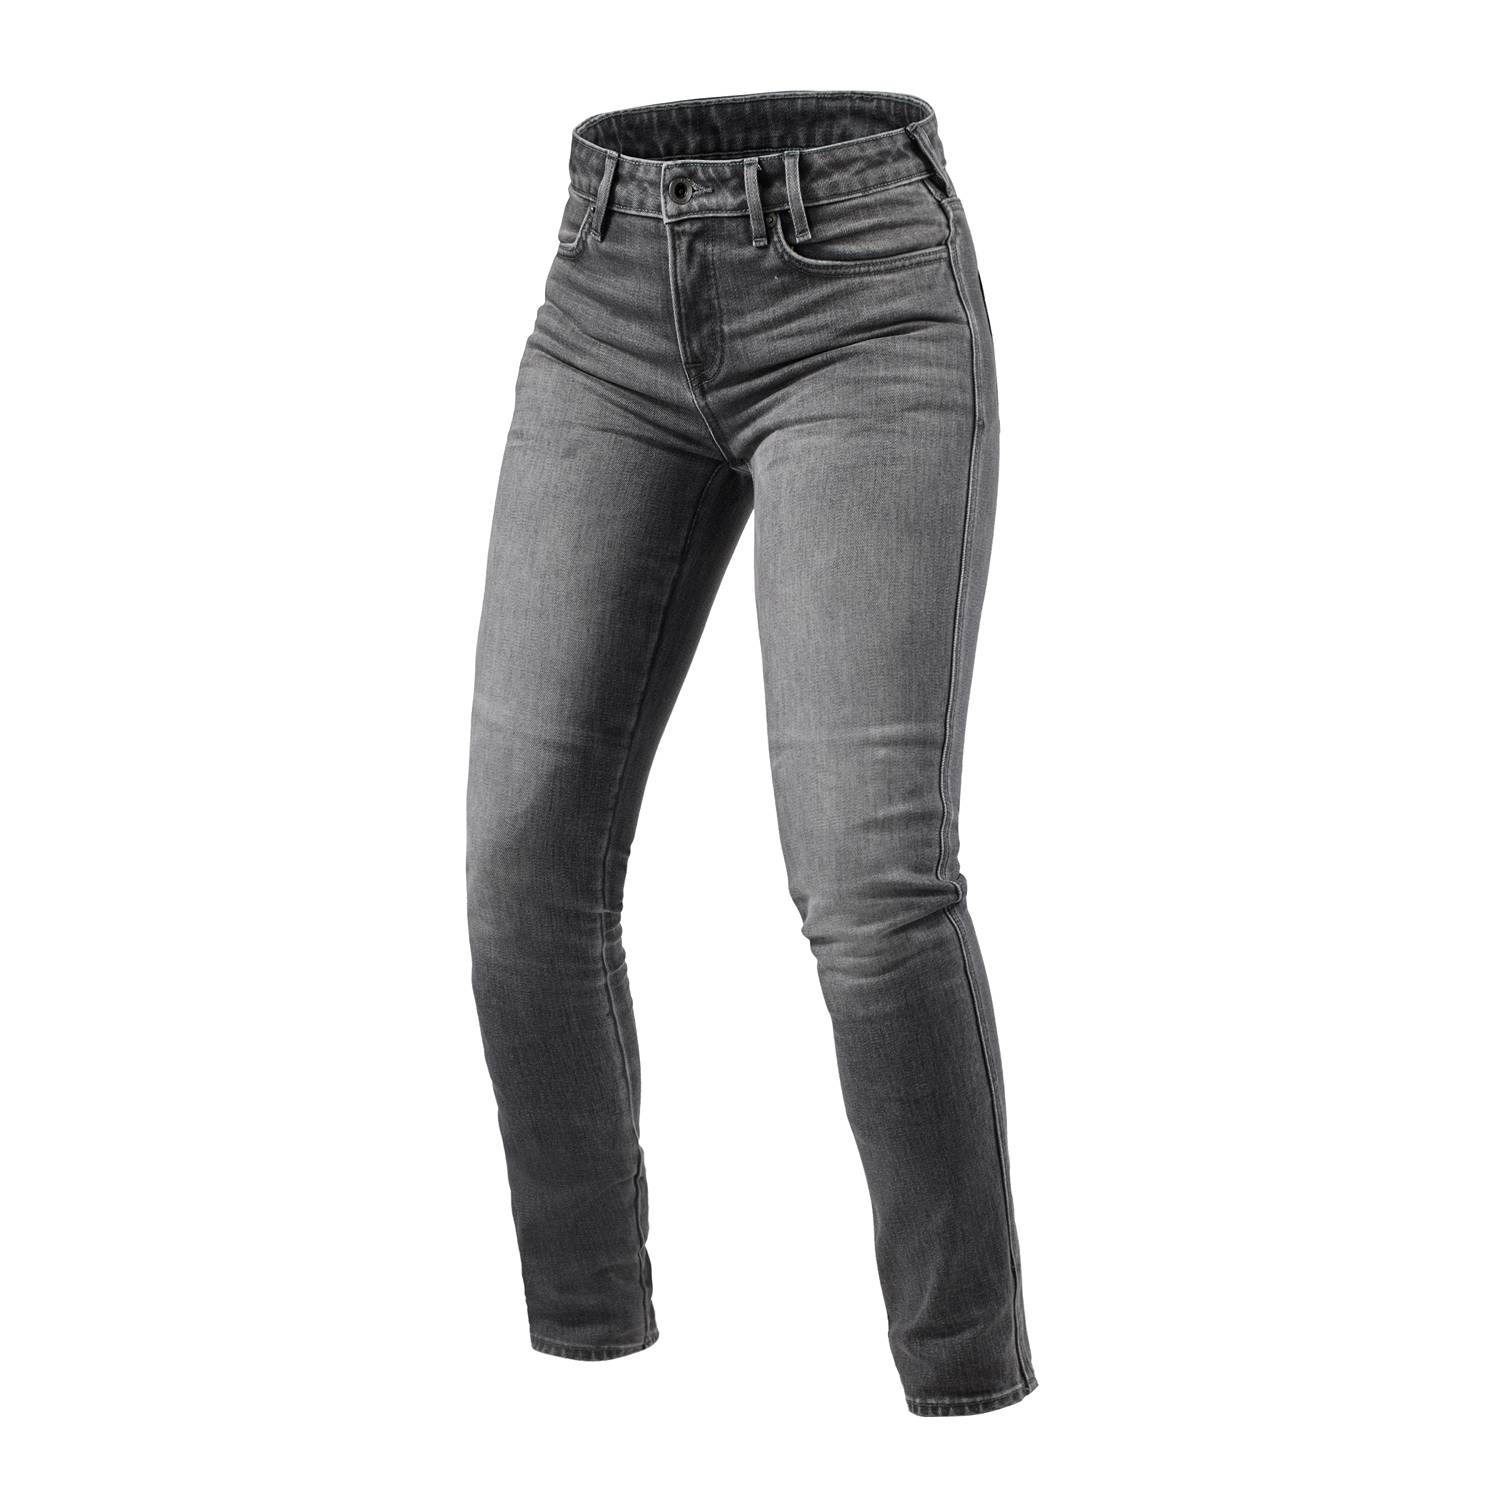 Image of REV'IT! Jeans Shelby 2 Ladies SK Medium Grey Stone L30 Taille L30/W32